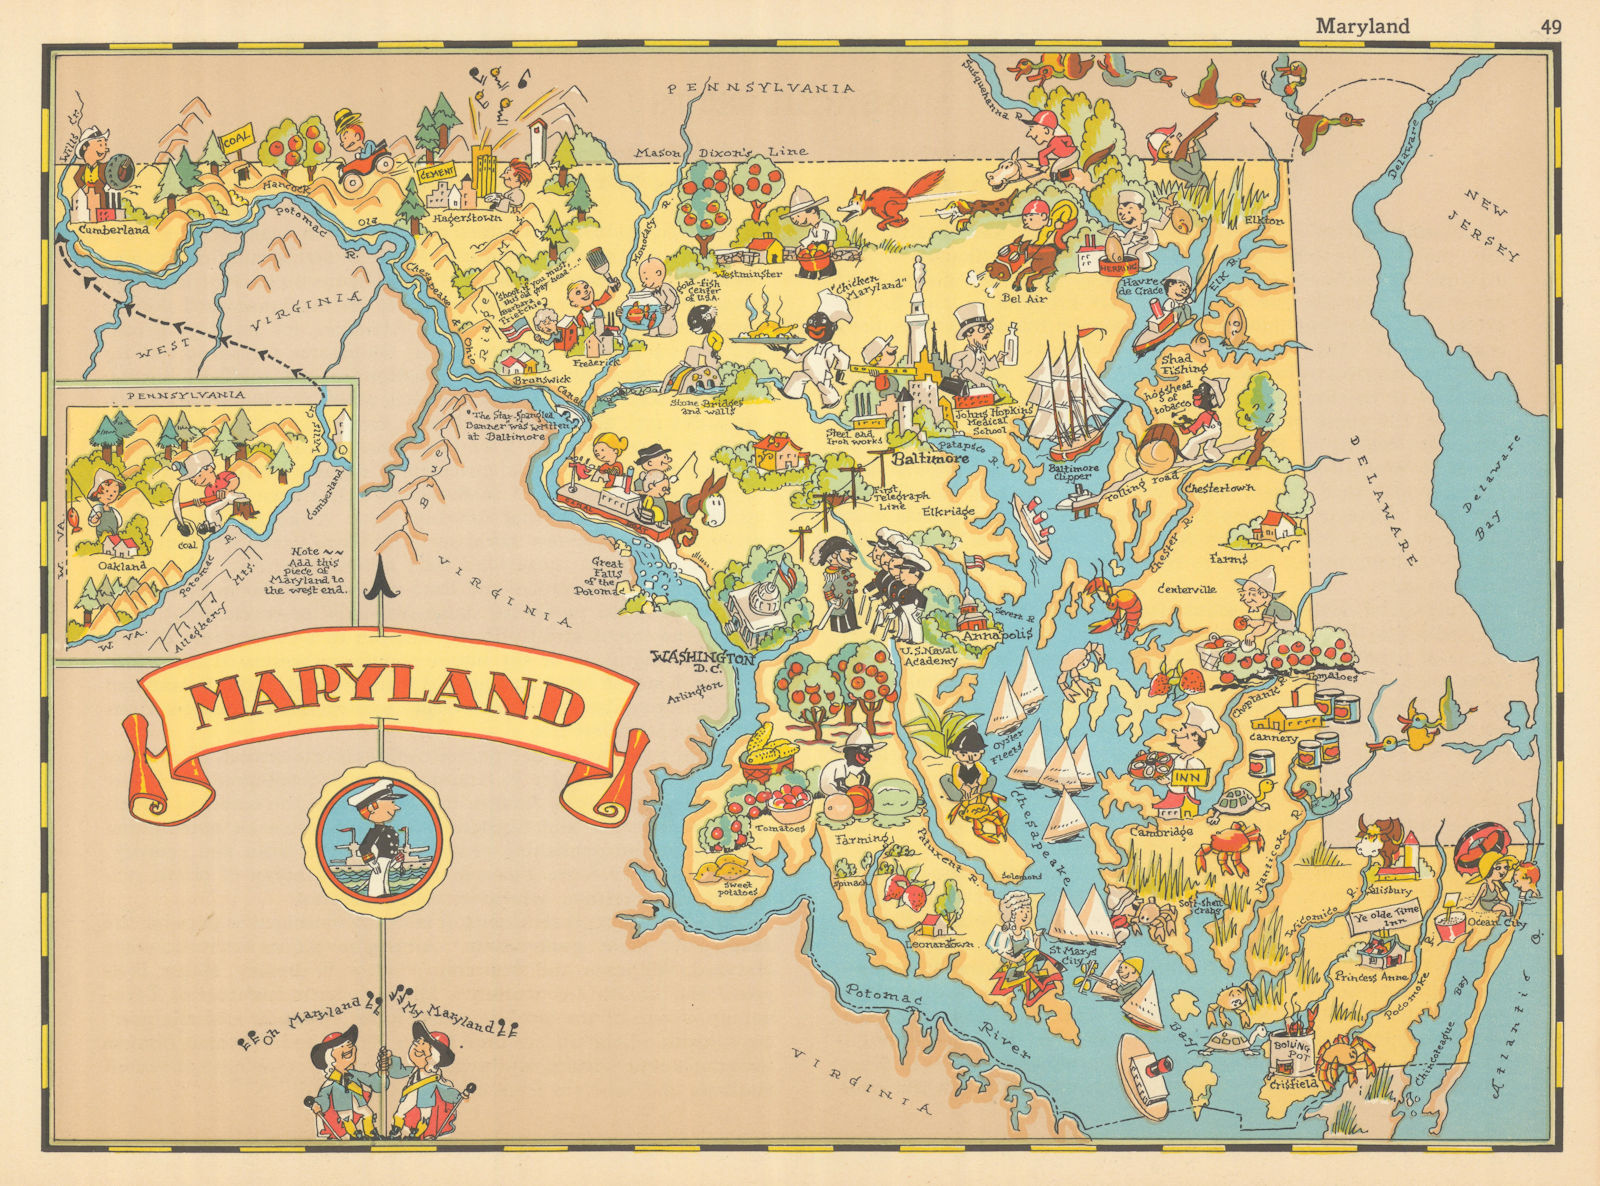 Associate Product Maryland. Pictorial state map by Ruth Taylor White 1935 old vintage chart